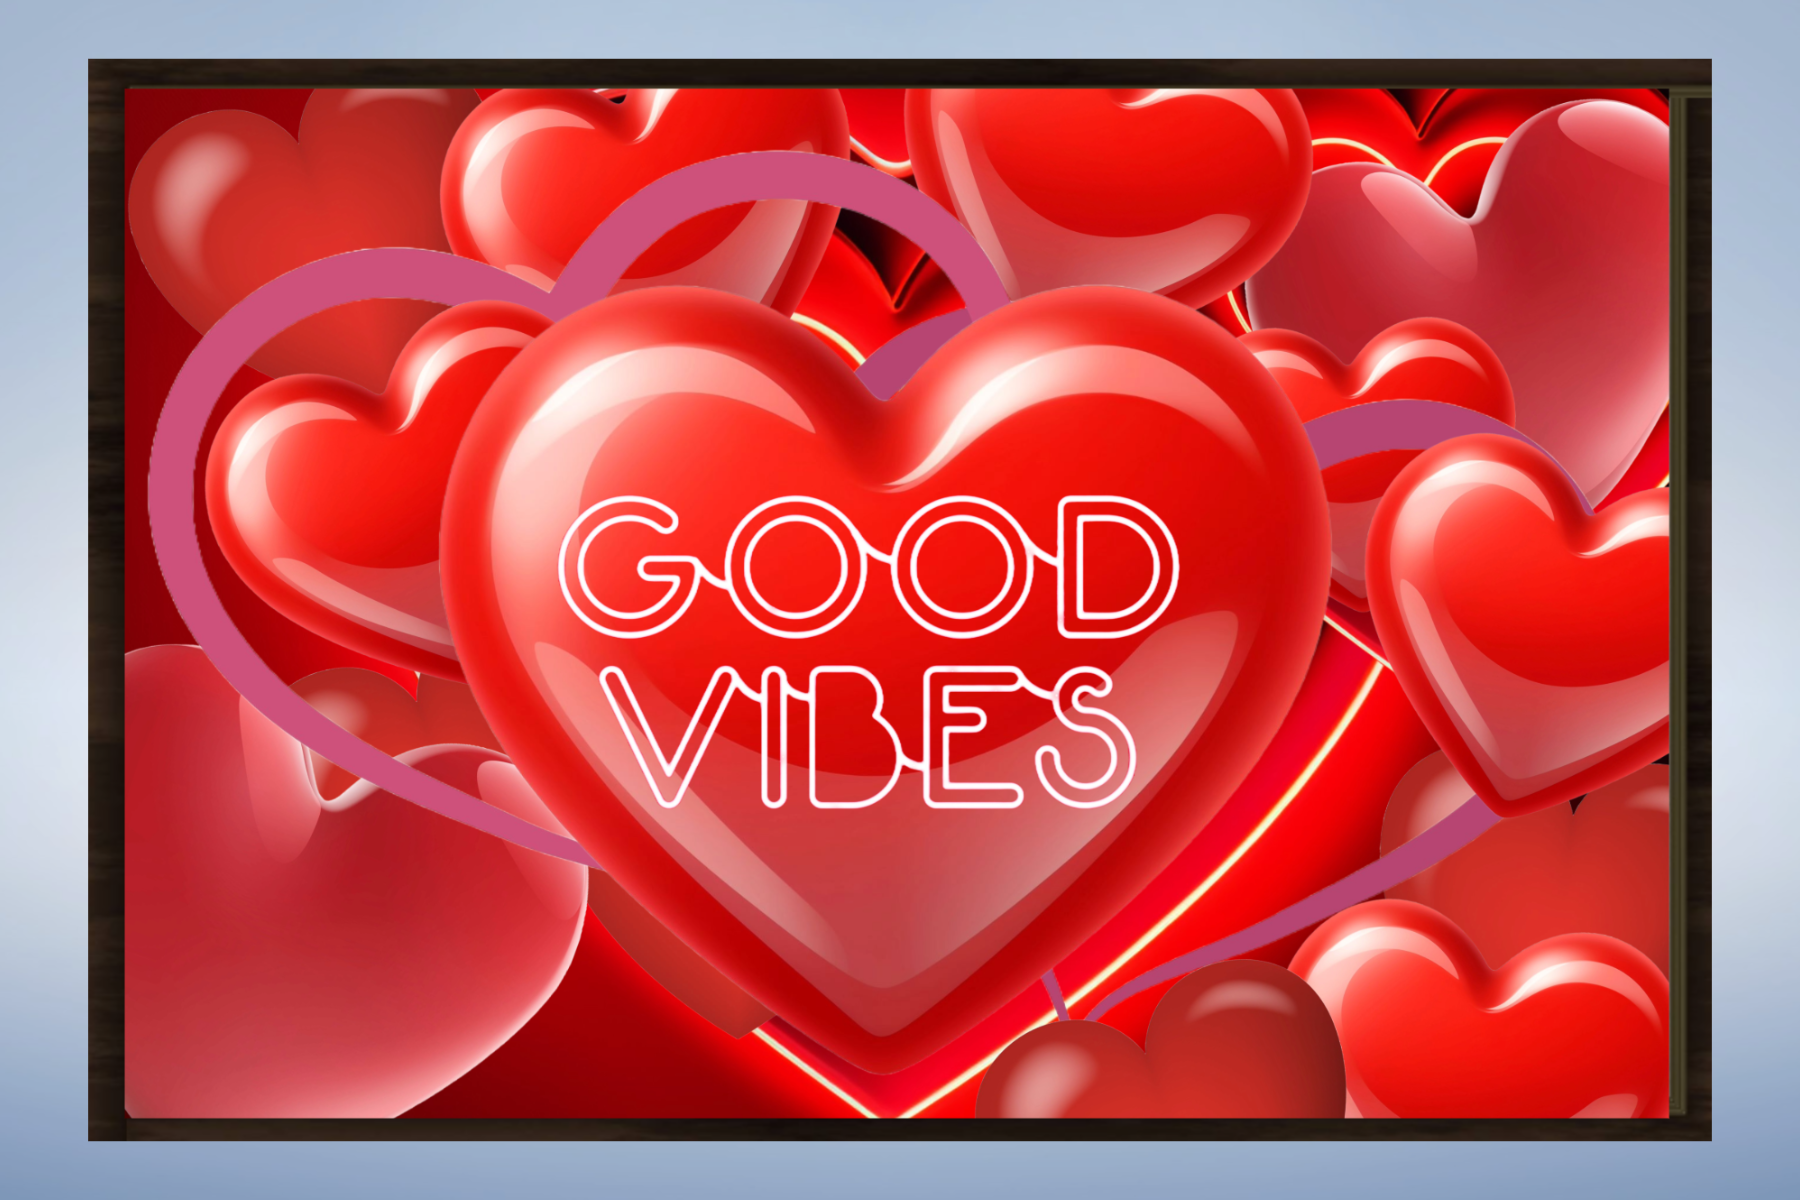 Wall Art Canvas GOOD VIBES Print Painting Original Giclee + Frame Love Nice Heart Beauty Fun Design Fit Hot House Home Office Gift Ready Hang Living